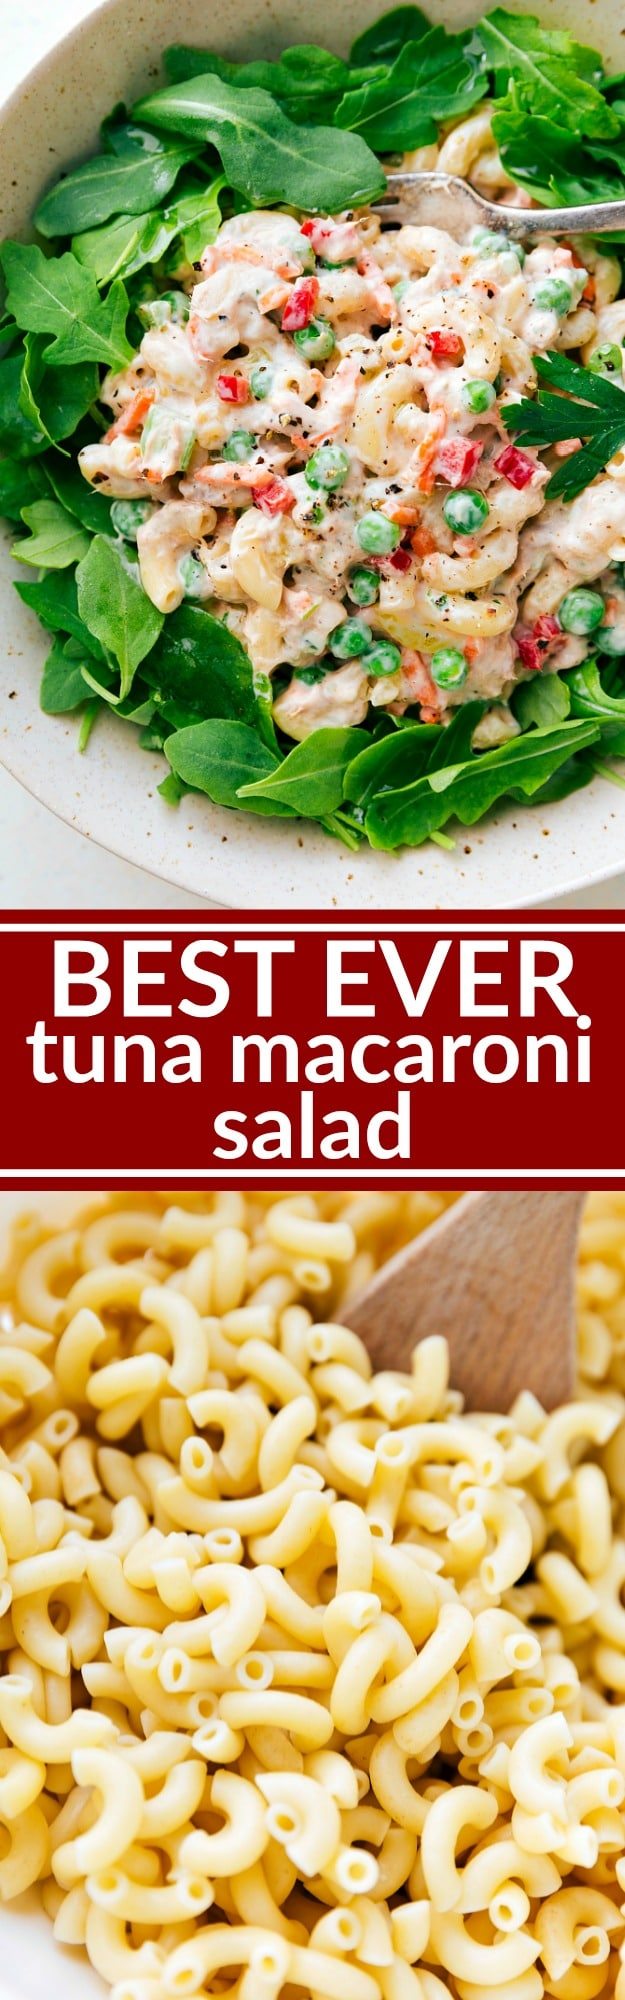 The best macaroni tuna salad bursting with flavor and so simple to make. This salad can be ready in less than 30 minutes! via chelseasmessyapron.com